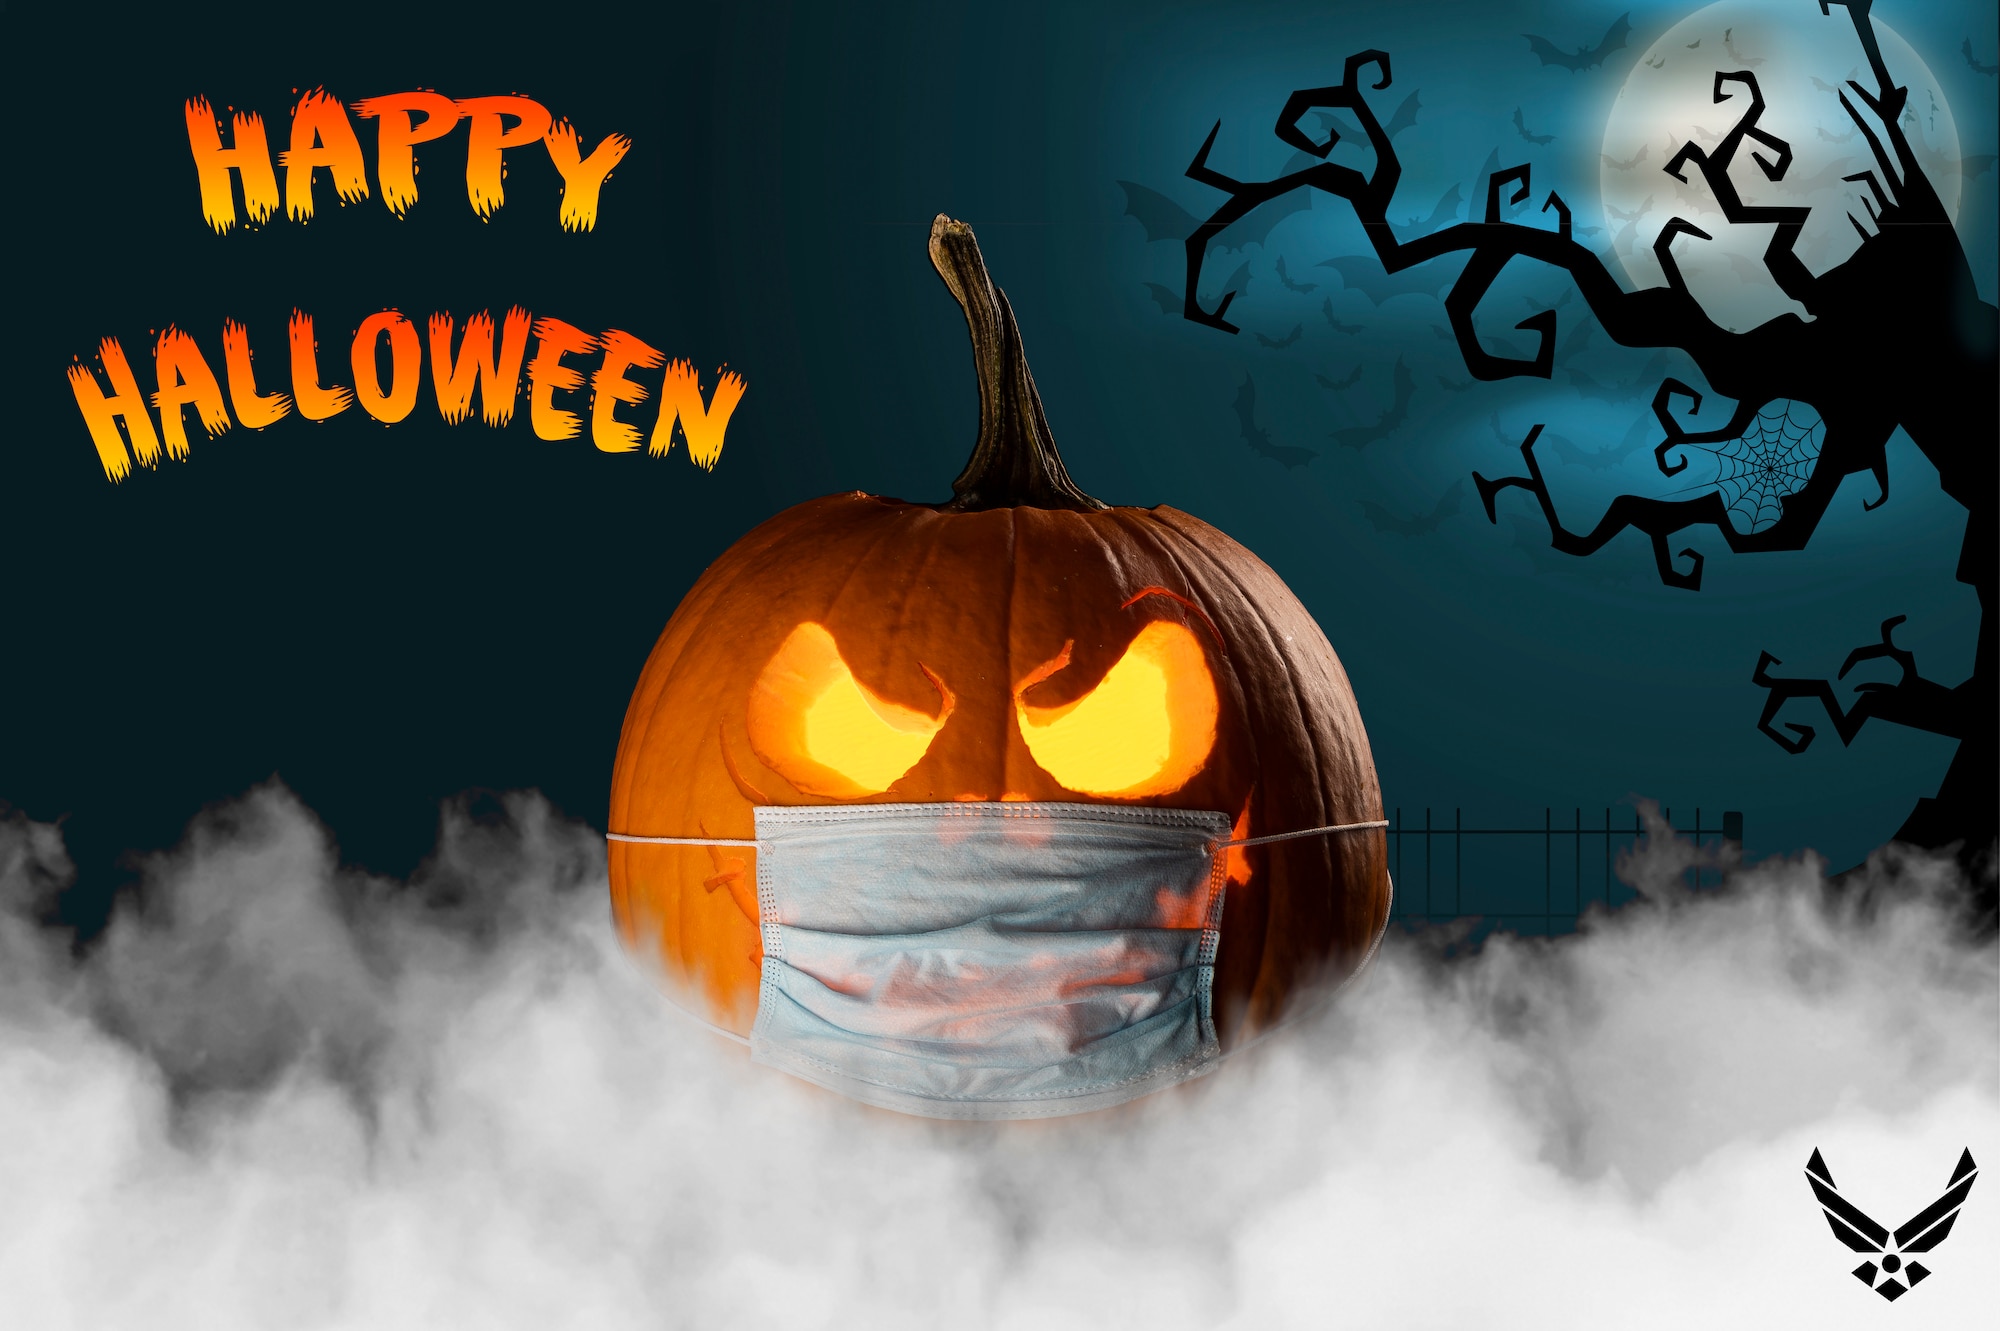 This Halloween photo illustration was created to wish everyone a safe and happy Halloween from the 436th Airlift Squadron at Dover Air Force Base, Delaware. (U.S. Air Force photo illustration by Senior Airman Christopher Quail) (This image was created with smoke added to the bottom and a background was added.)